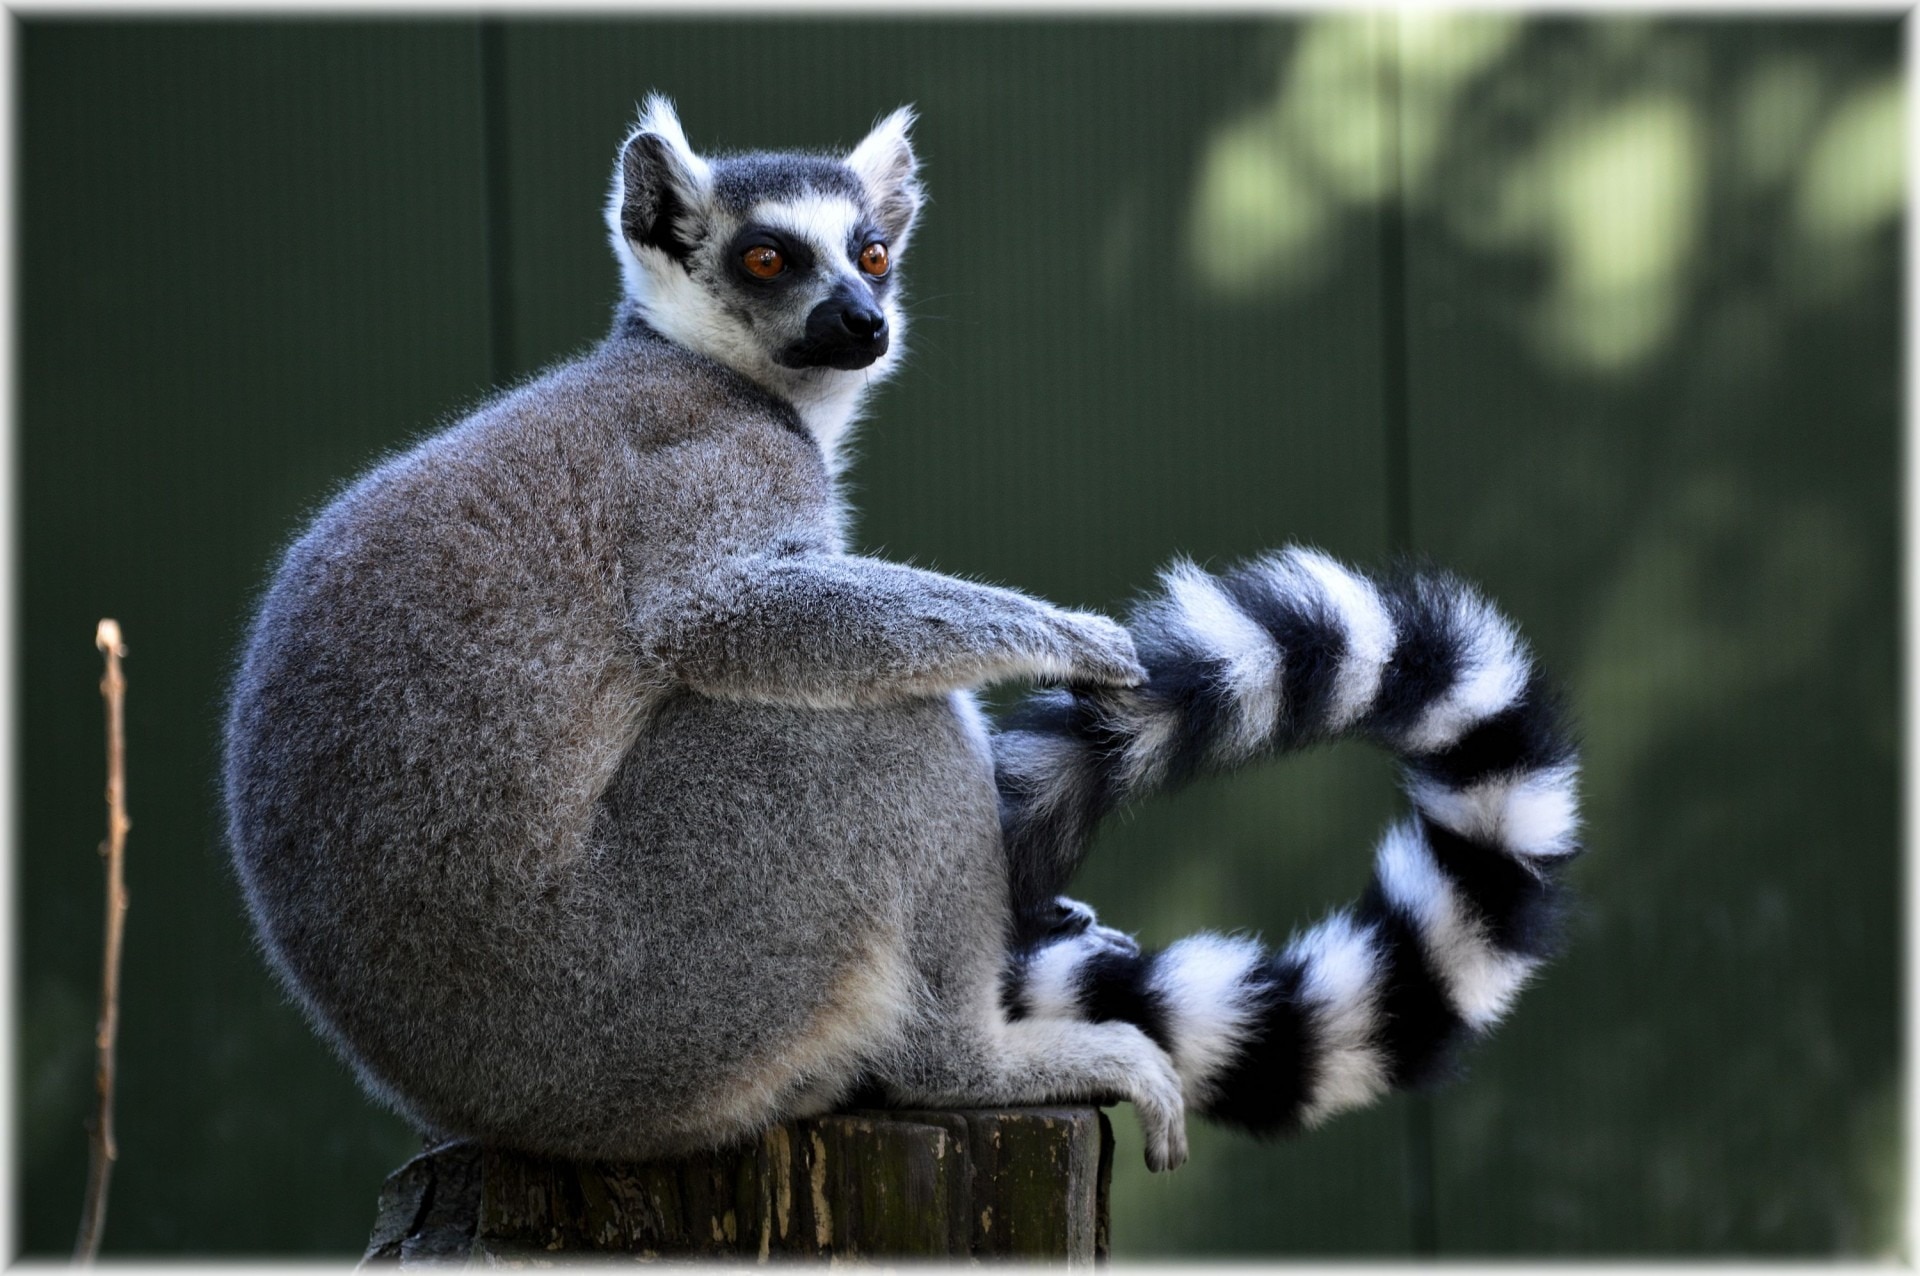 Exotic, Wild, Rare, Ring-Tailed Lemur, one animal, animals in the wild